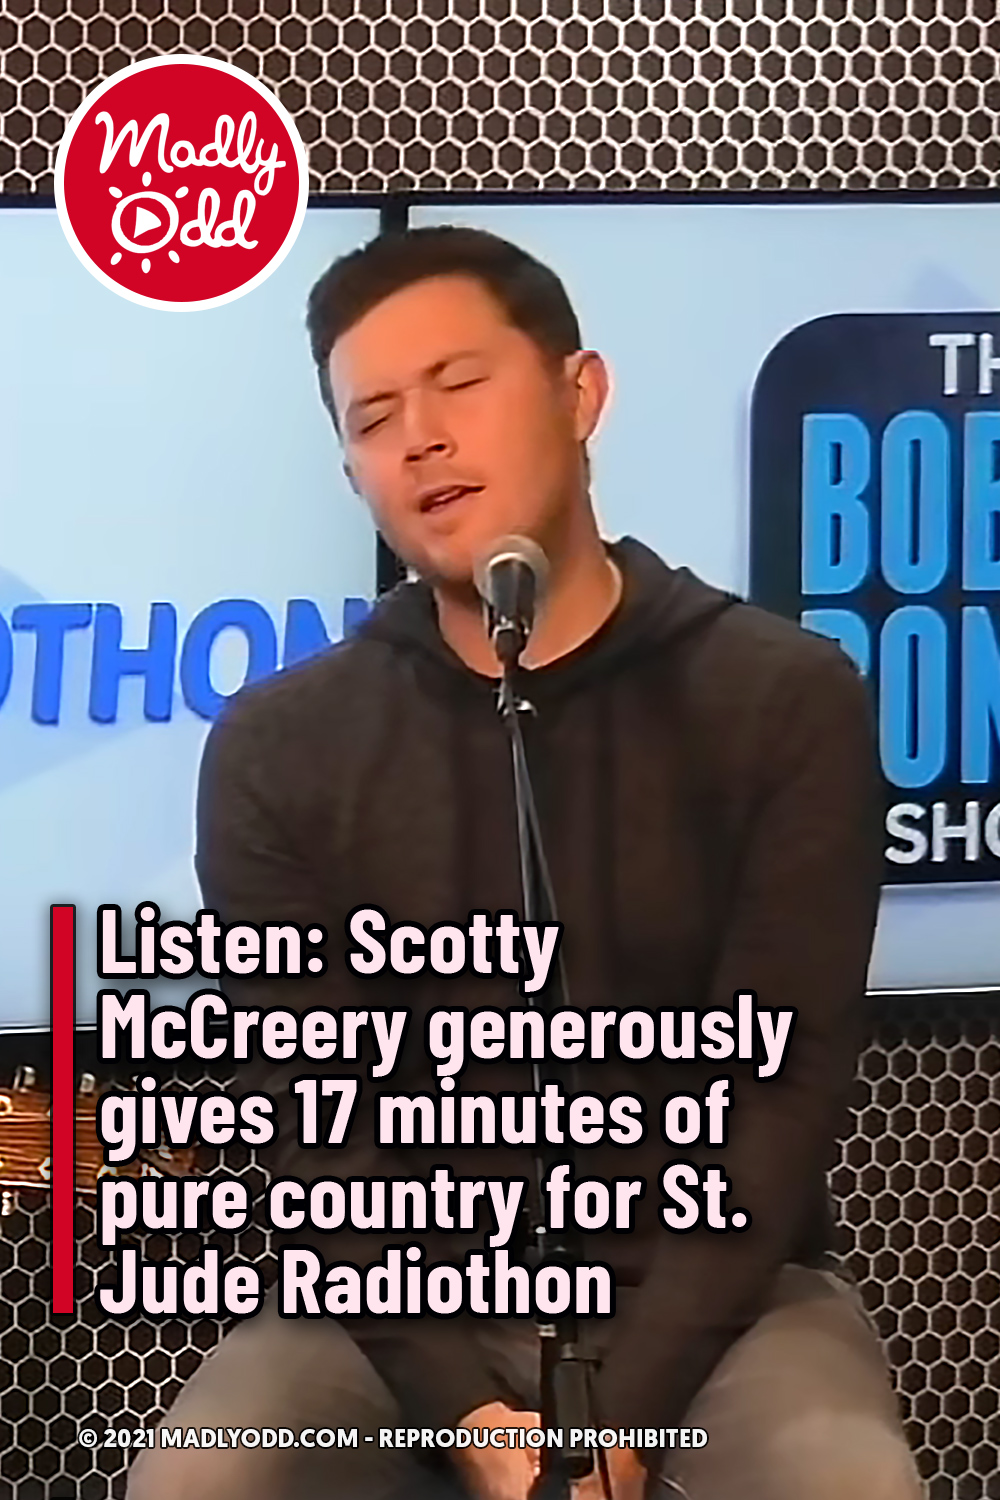 Listen: Scotty McCreery generously gives 17 minutes of pure country for St. Jude Radiothon